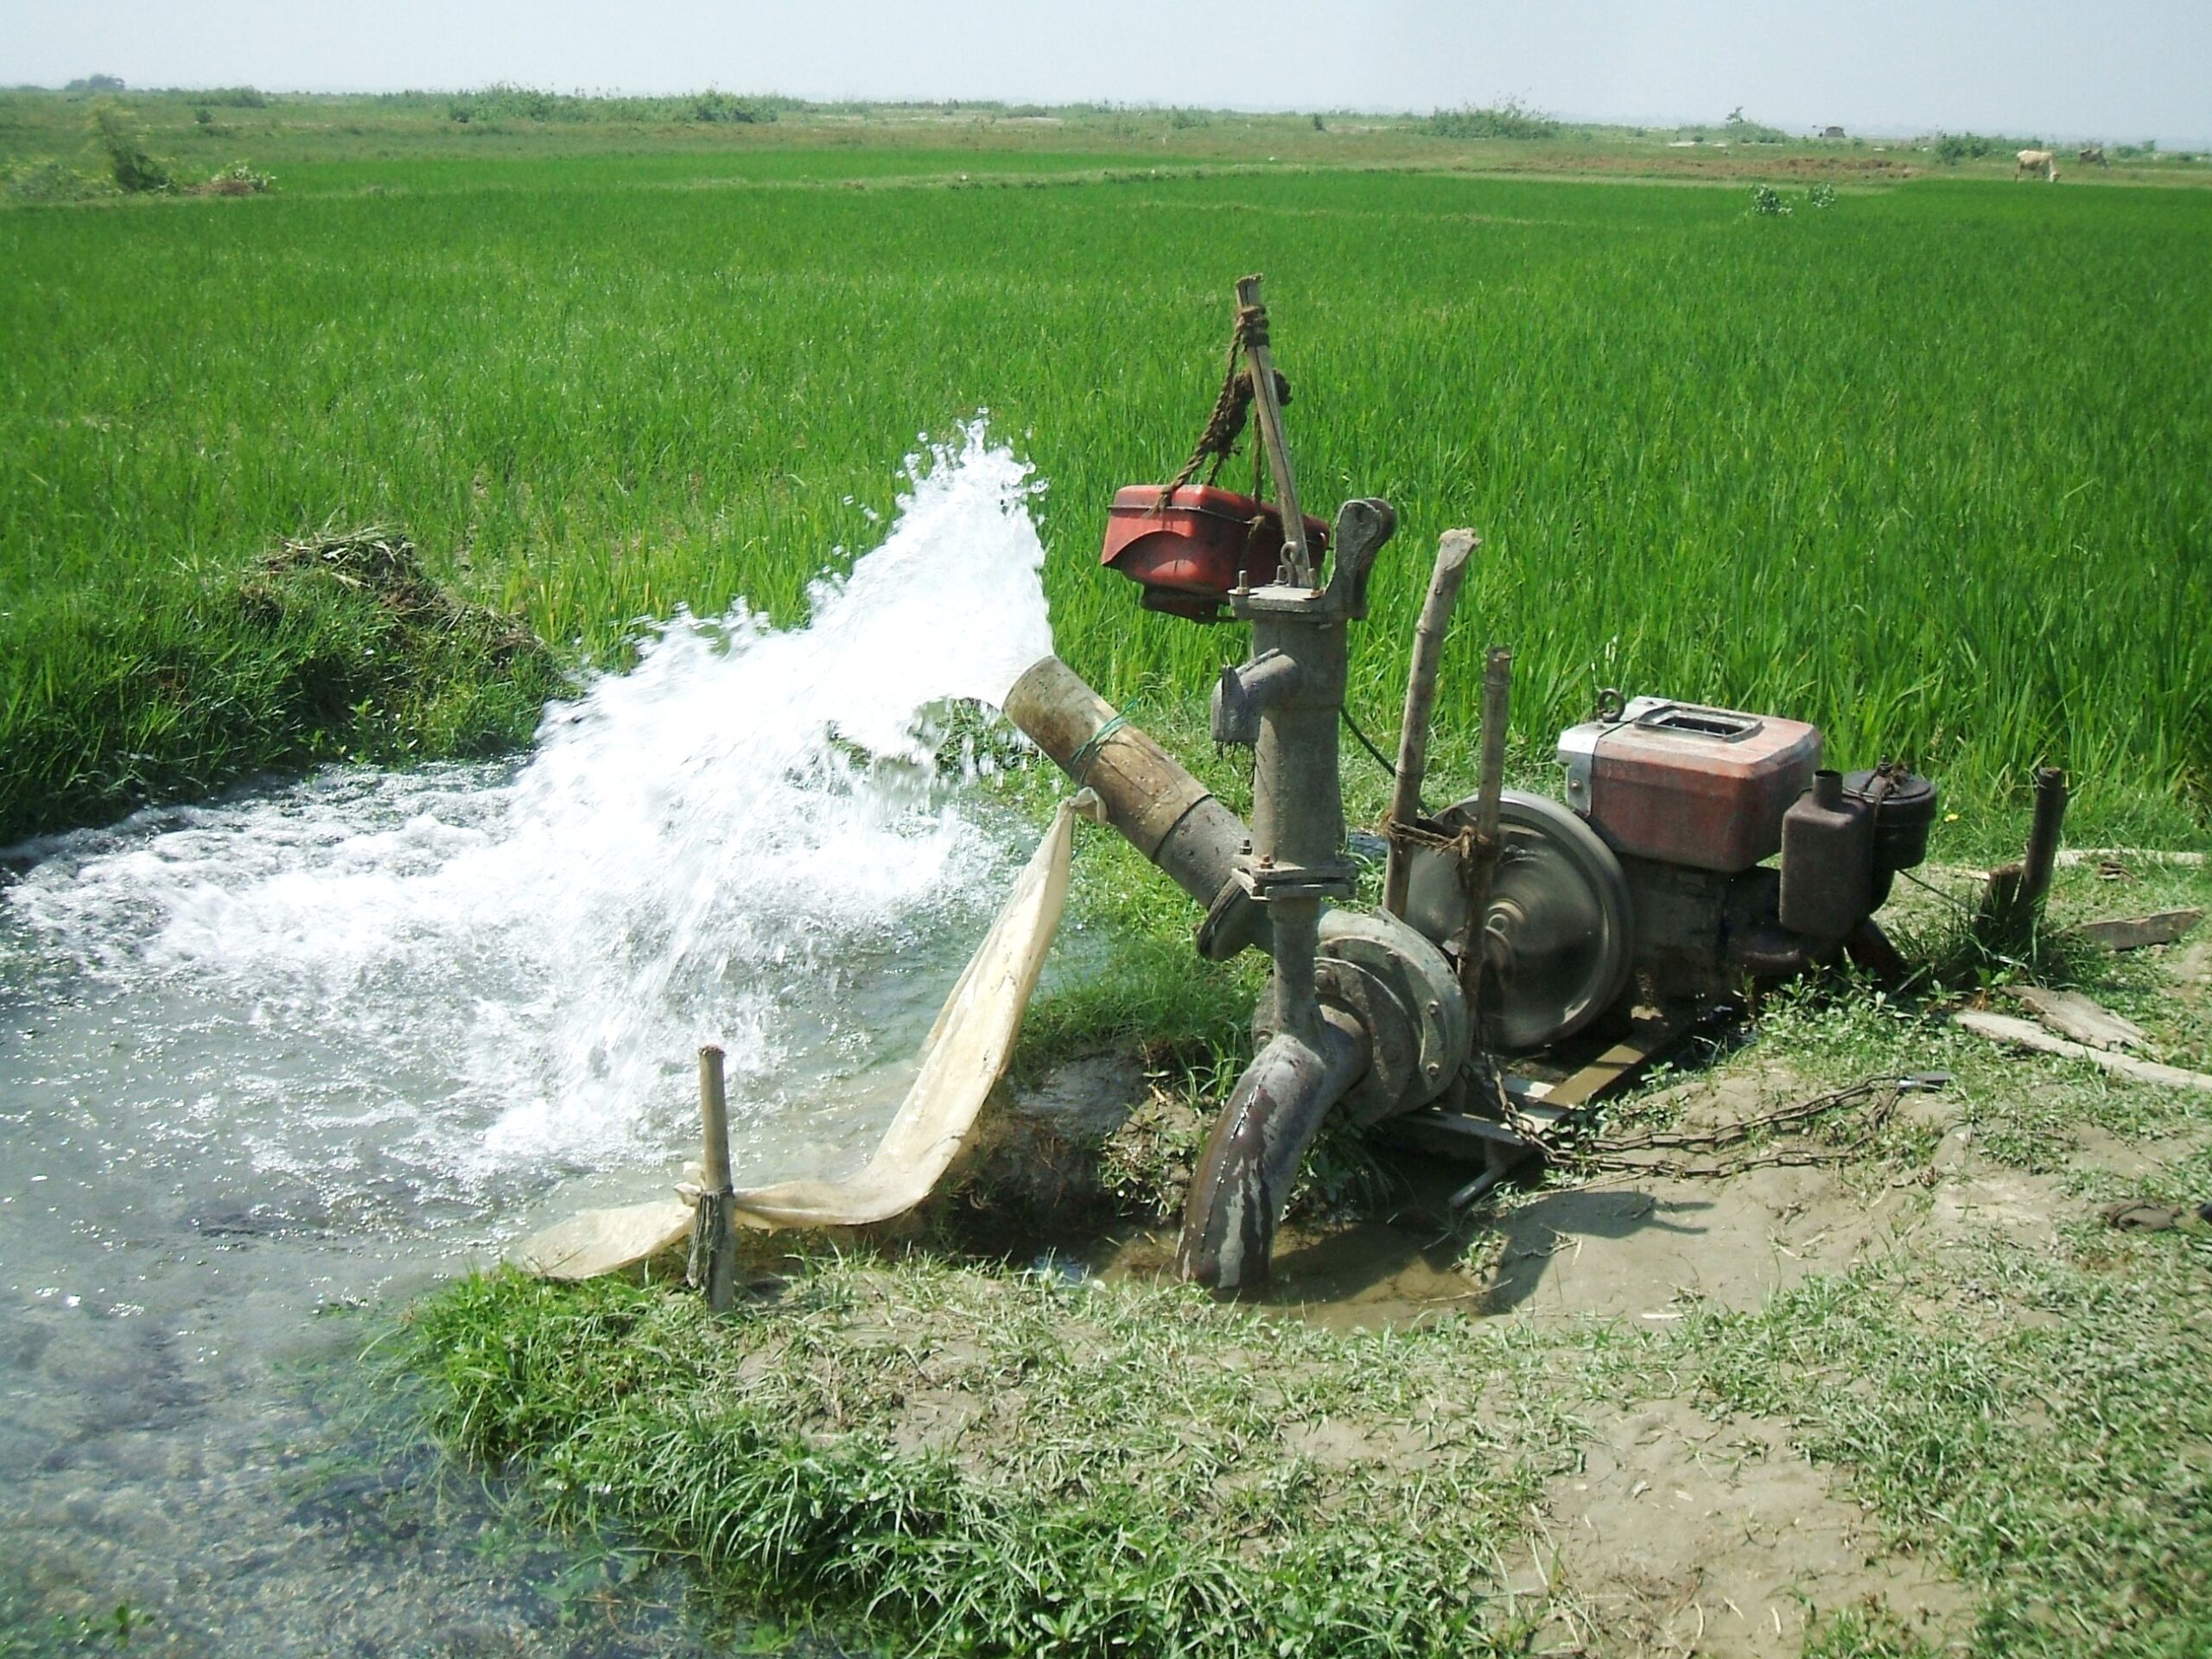 Groundwater pumps like this one deliver water from below to farms in Bangladesh.